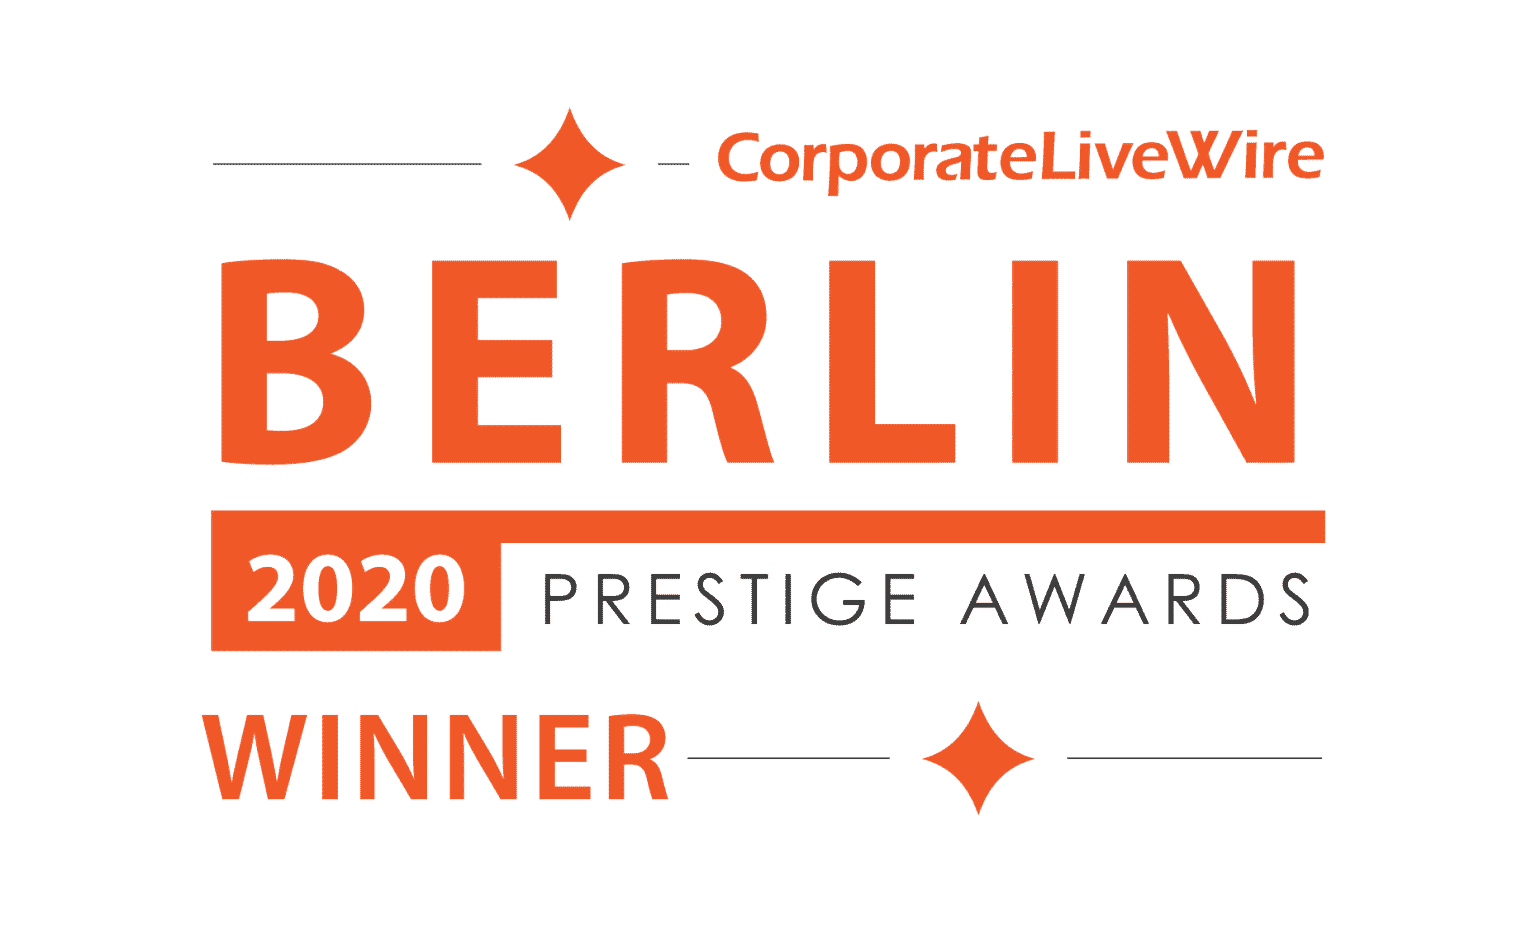 Get a property appraisal in Berlin from the "real estate agency of Year" Award winner